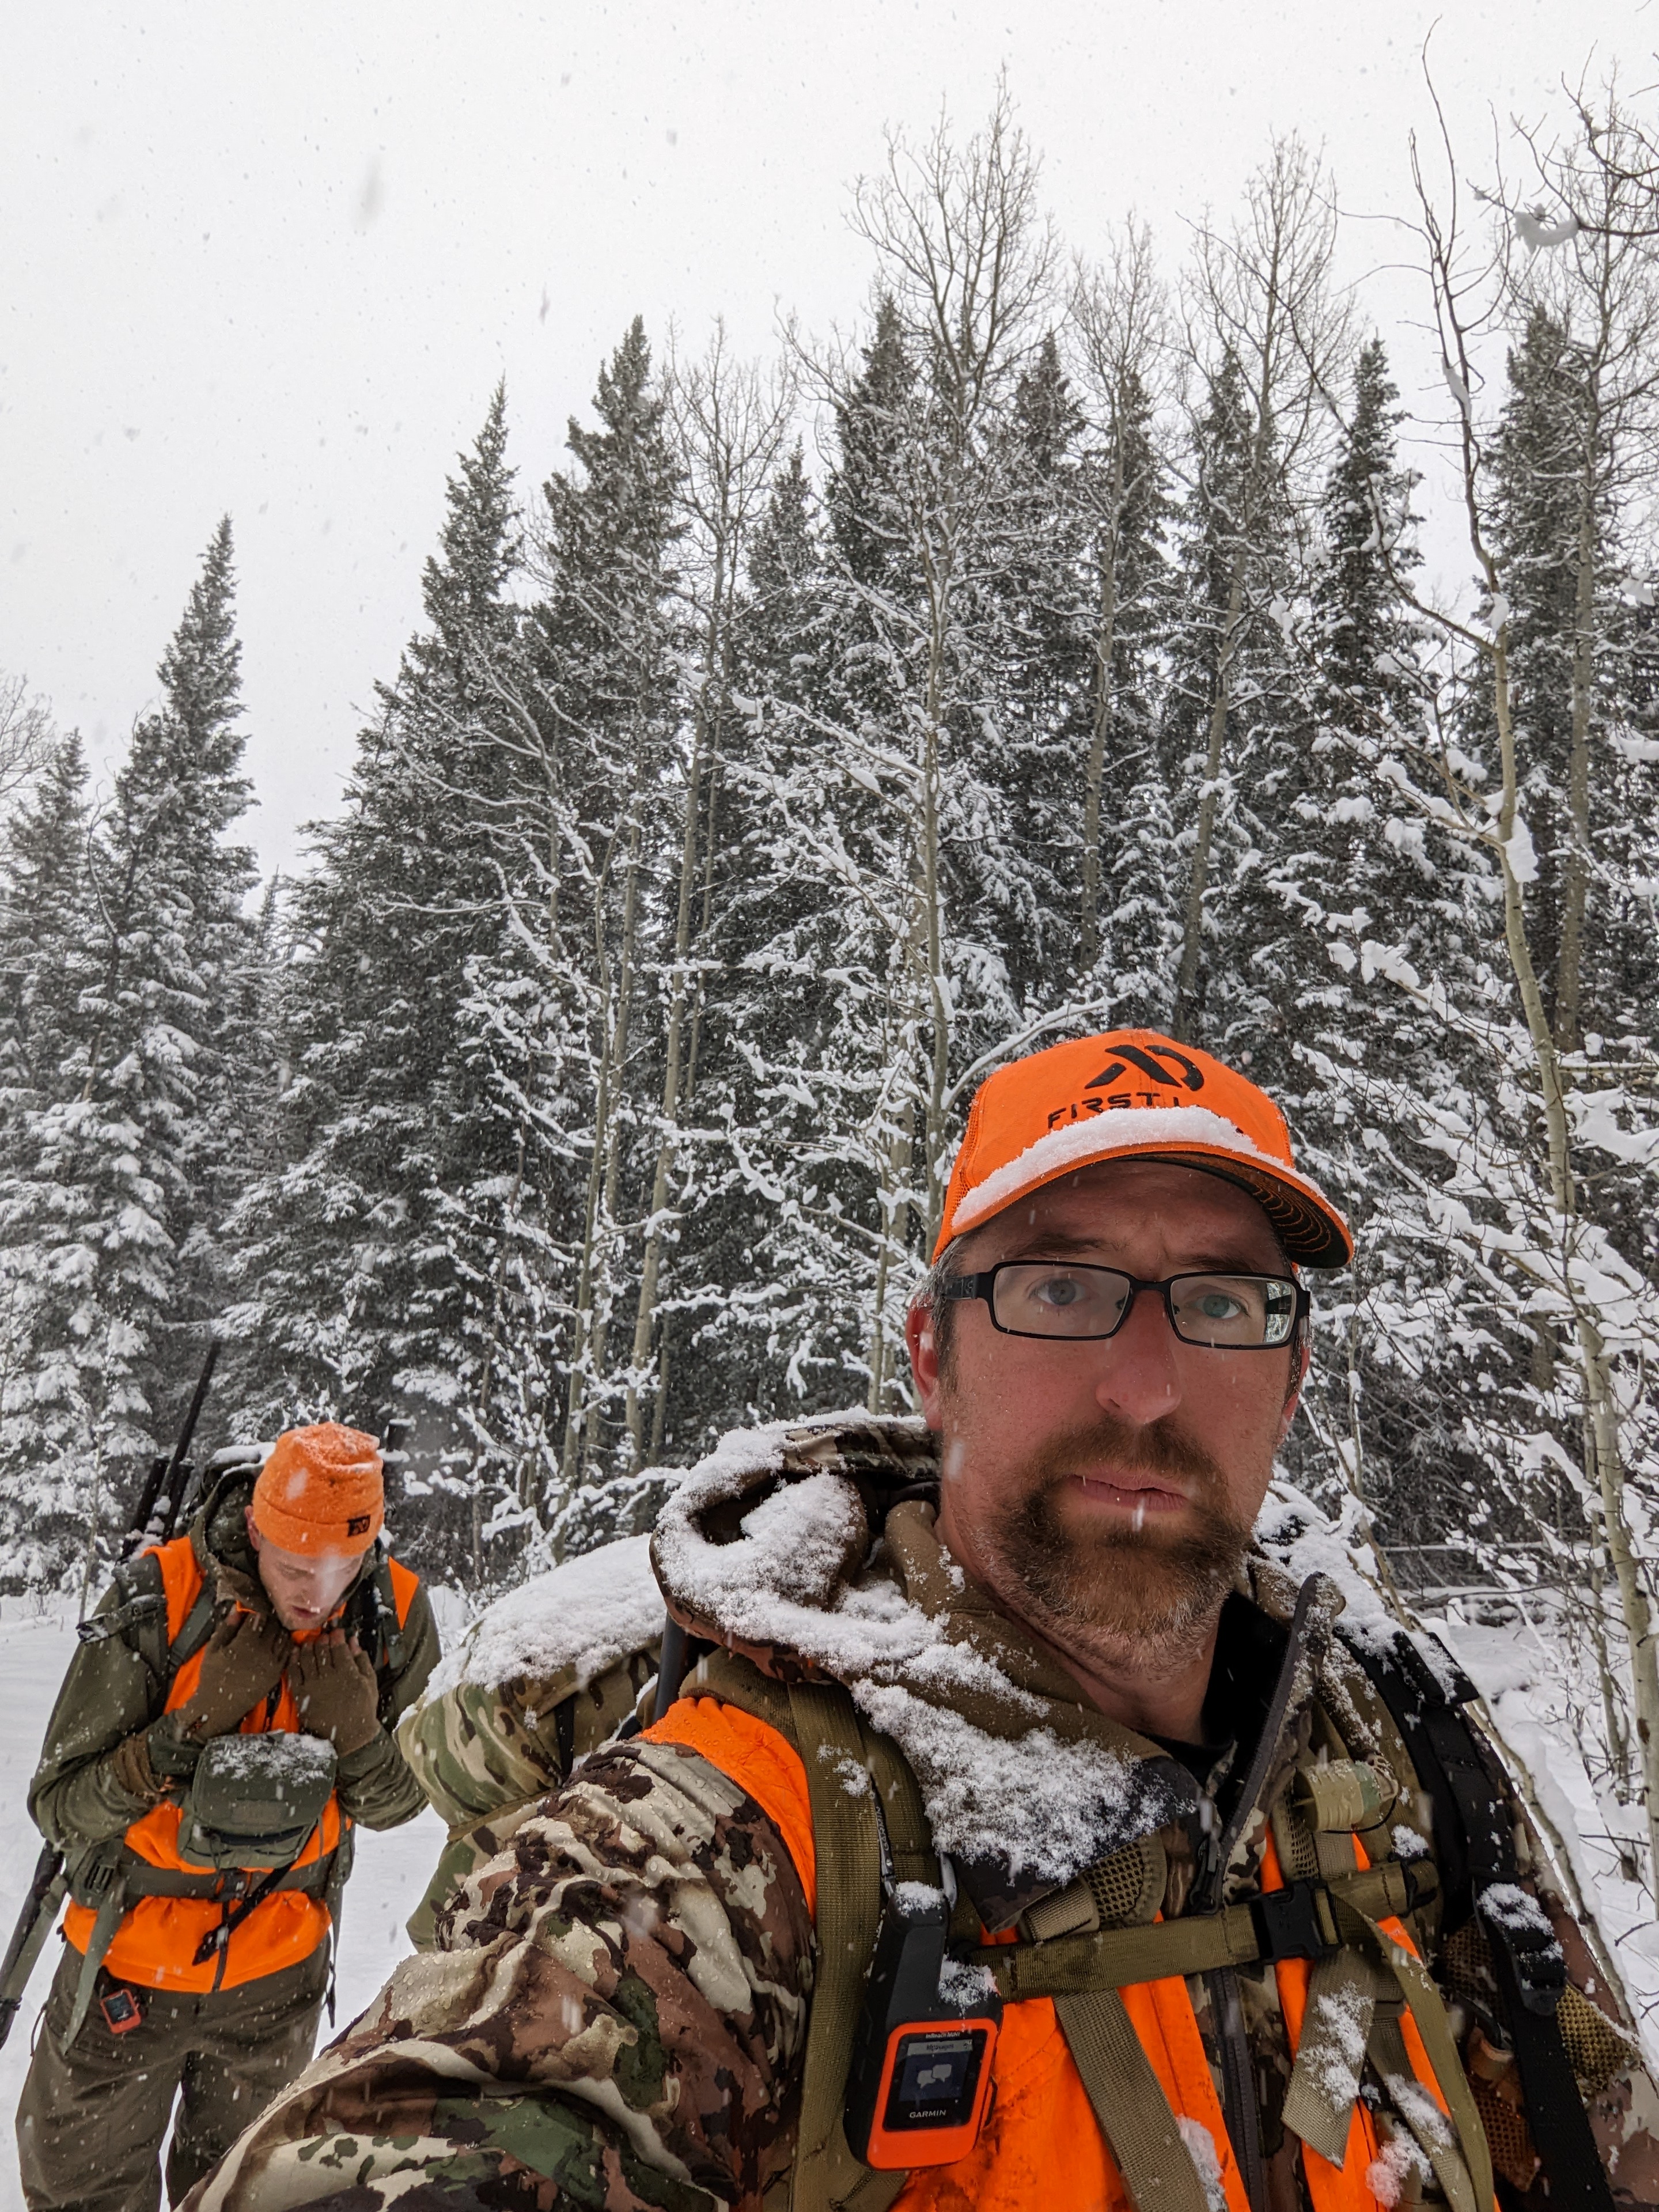 Second rifle seems to always end the same way, with snow coming in heavy. It's no different in this trip report.